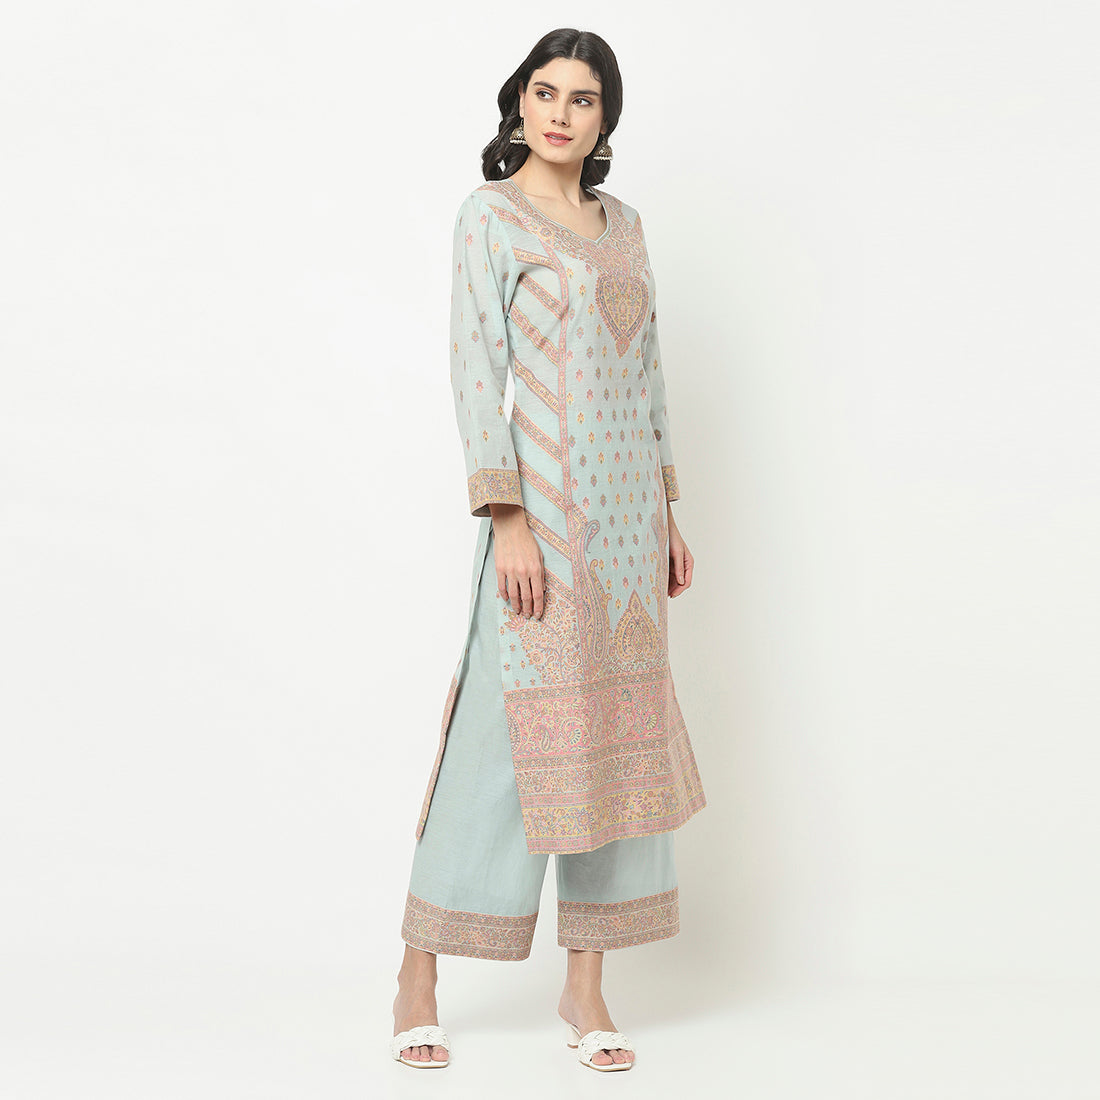 Organic Cotton Woven Design Unstitched Dress Material With Dupatta